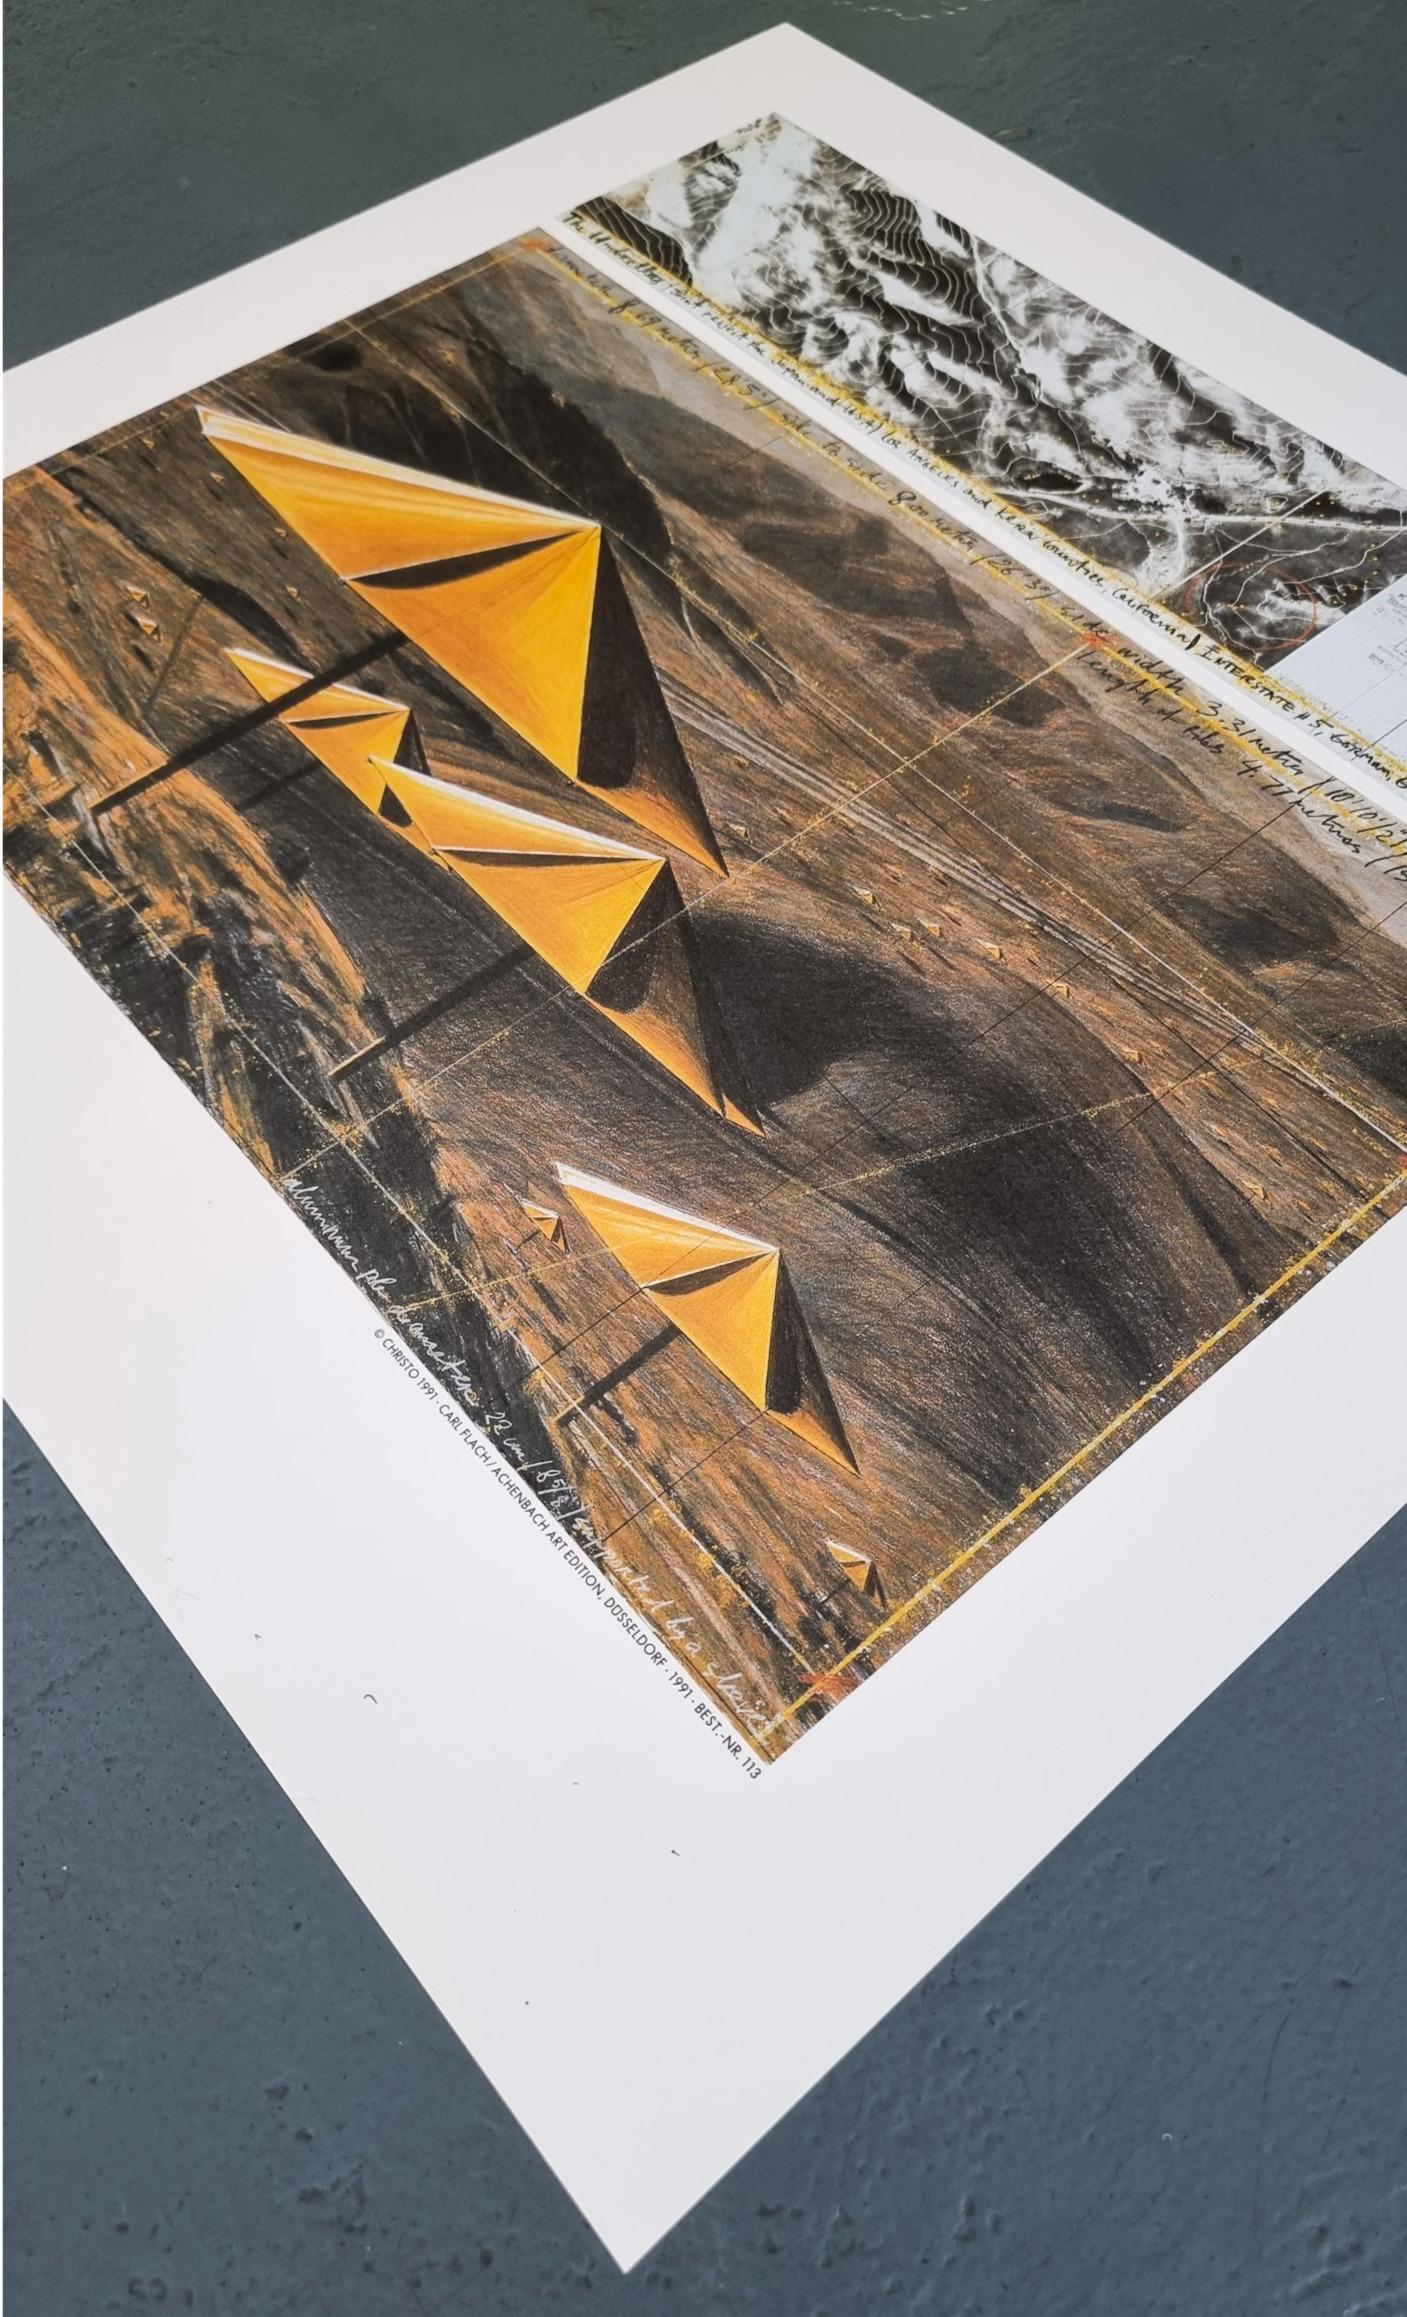 The Umbrellas (Yellow) (FRAMED - BLACK OR WHITE - YOU CHOOSE - FREE US SHIPPING) - Print by Christo and Jeanne-Claude